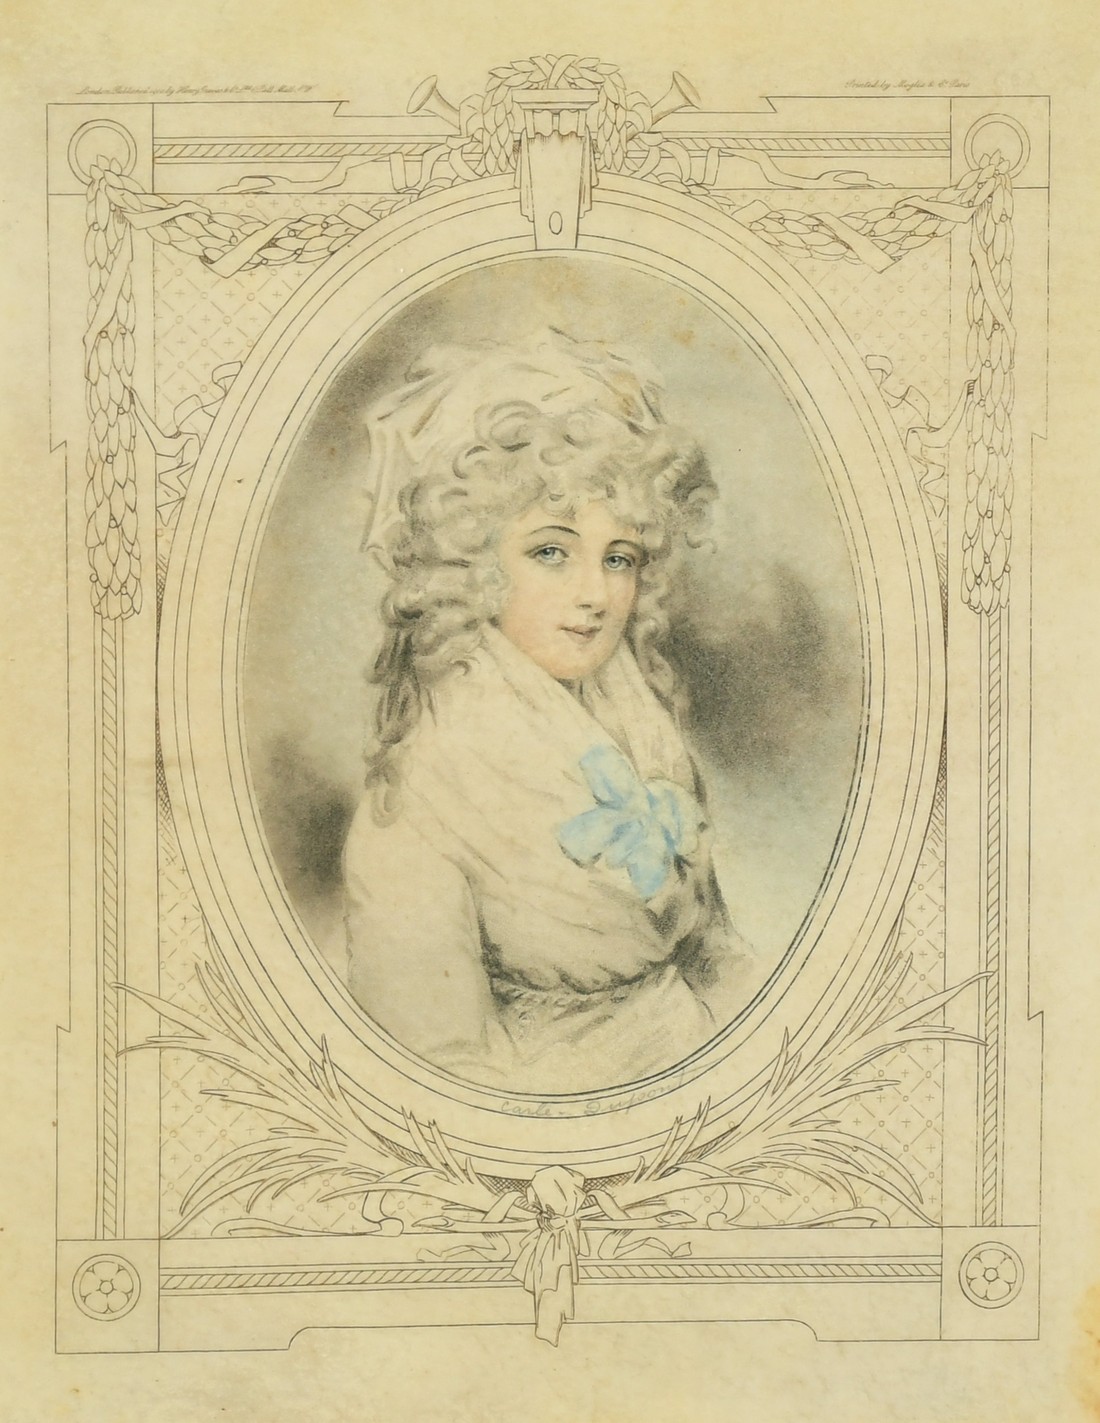 After John Downman (1750-1824) Five coloured lithographs, Portraits of ladies, published 1908 and